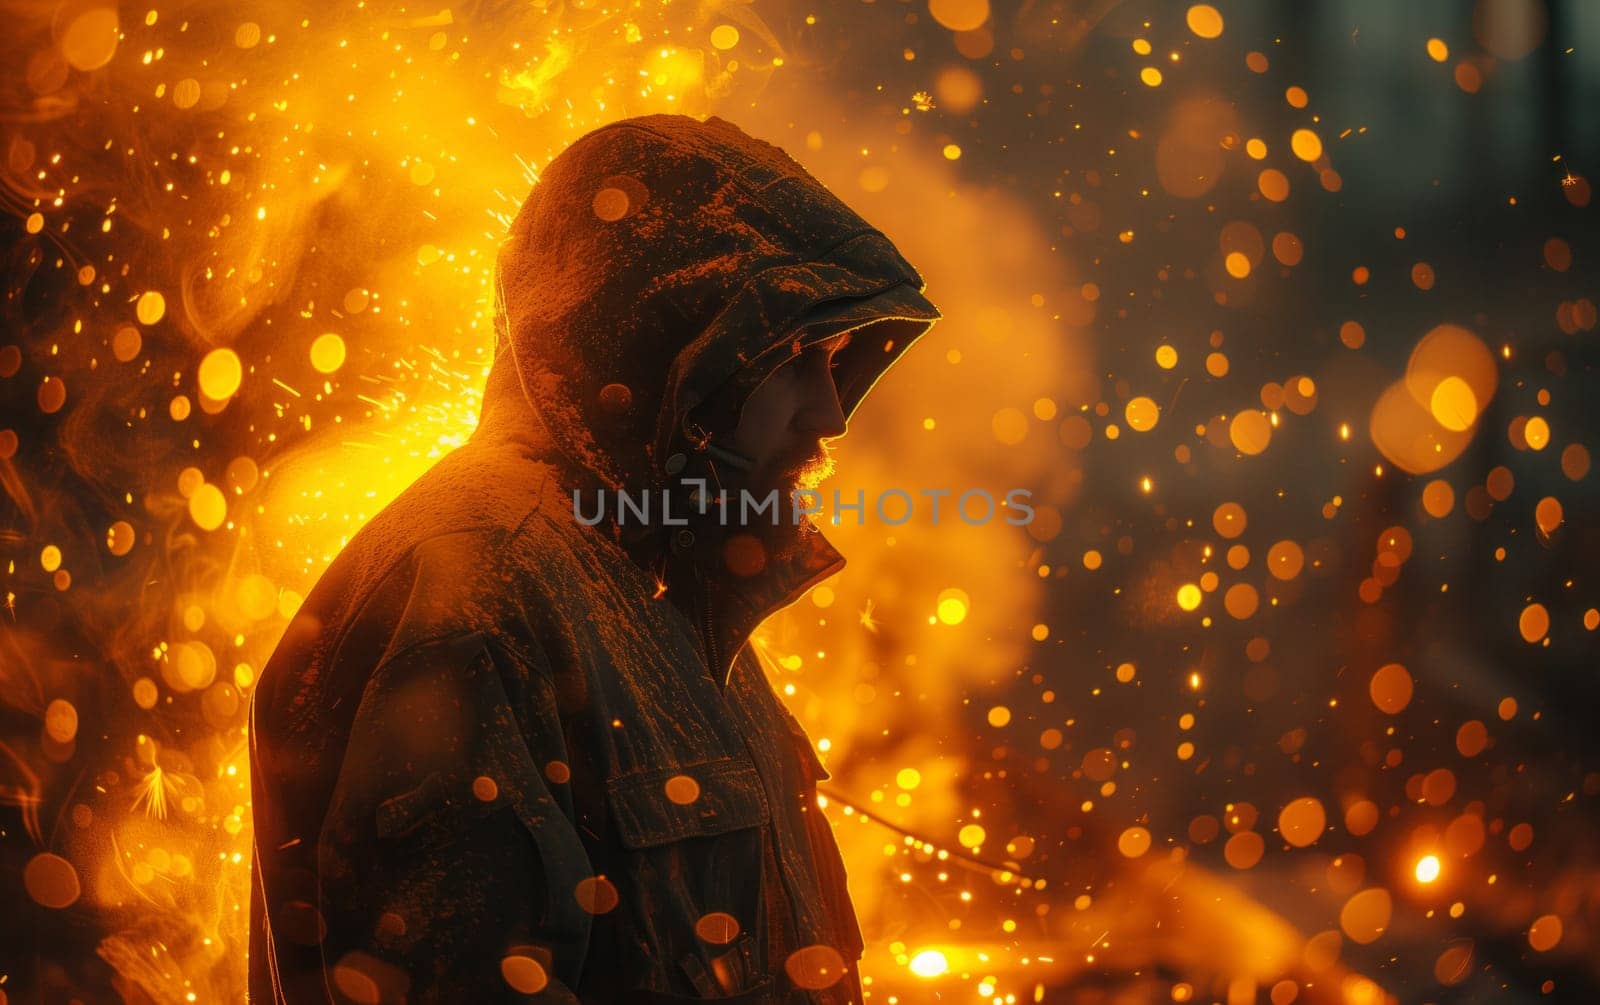 A man in a hooded jacket stands in front of a blazing fire, emanating warmth and light against the backdrop of darkness